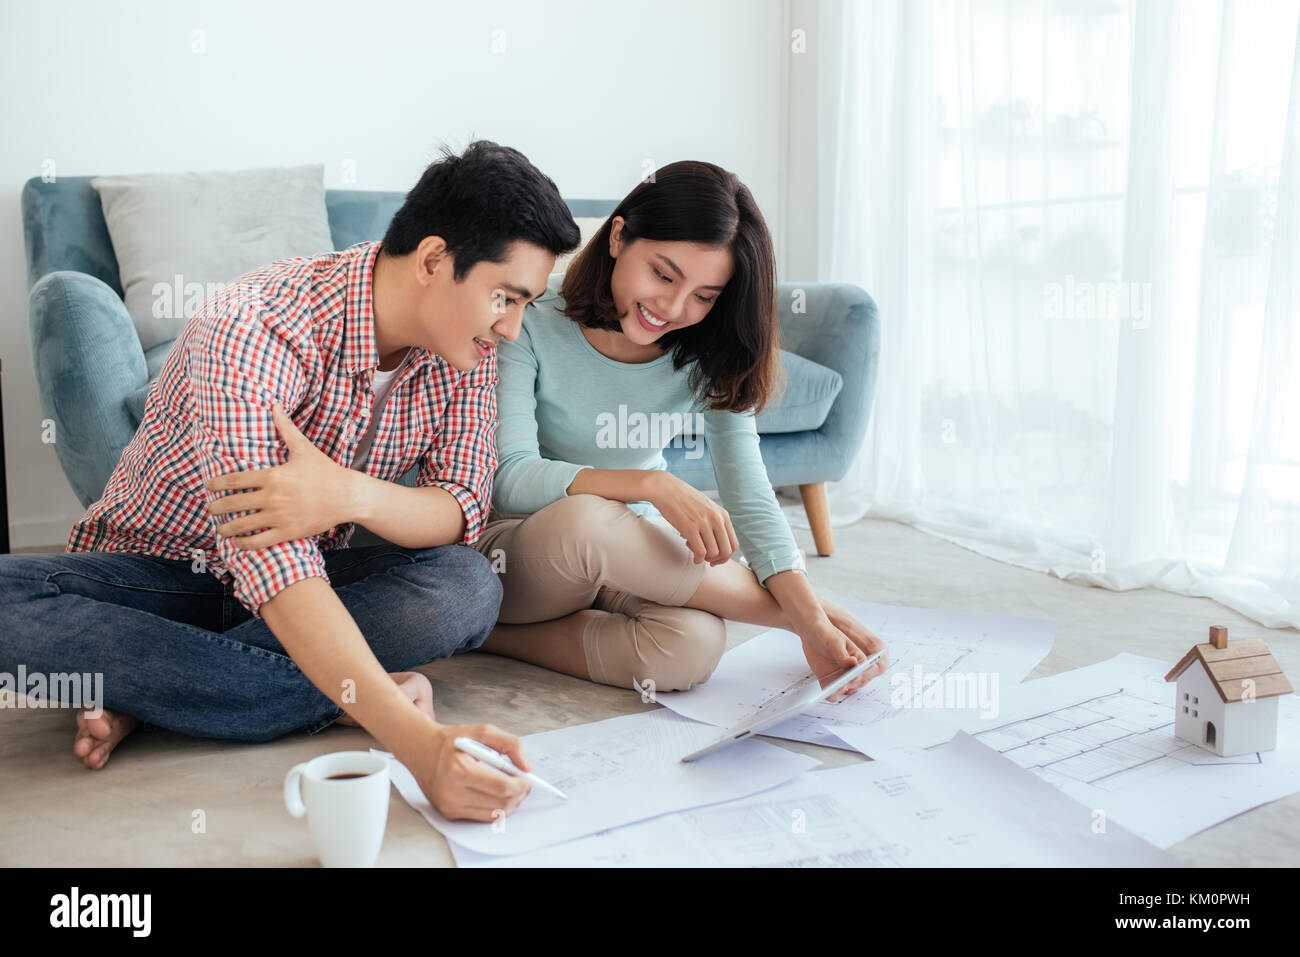 The couple are discussing house plans of the dream home. Family happiness. Stock Photo